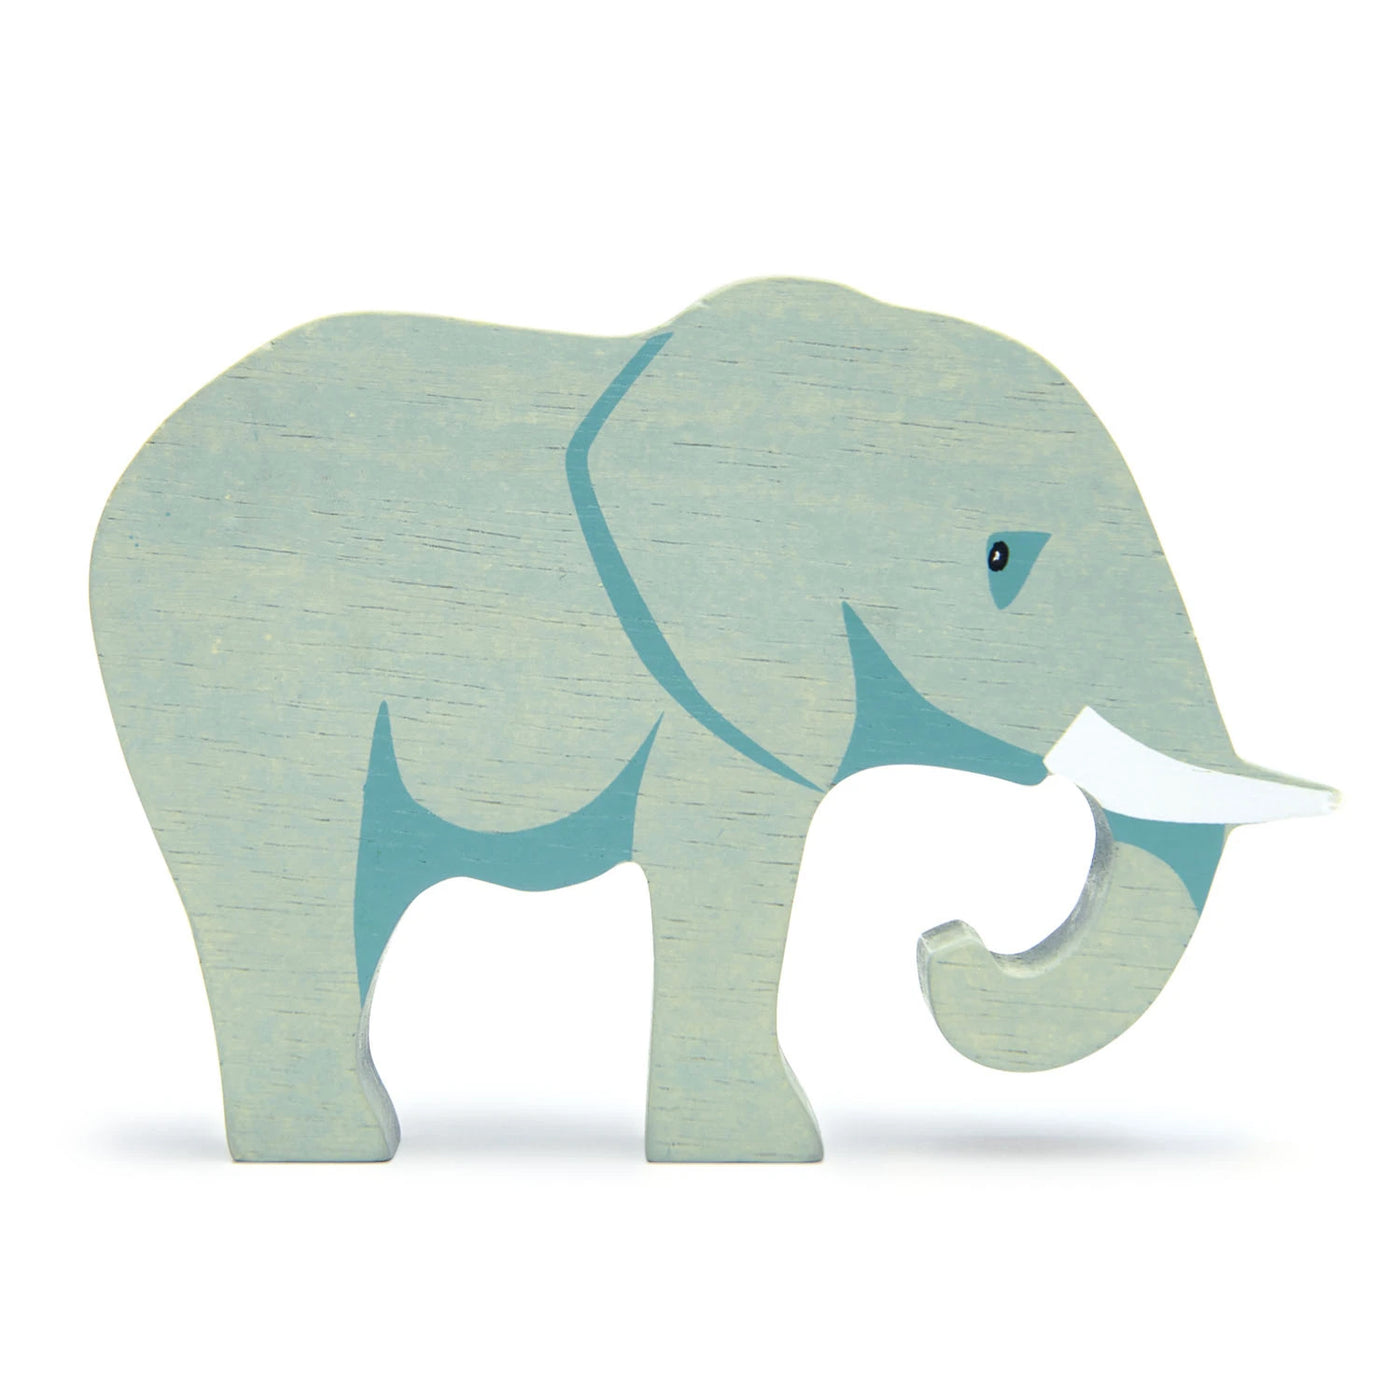 Wooden safari elephant toy for kids made of eco-friendly wood